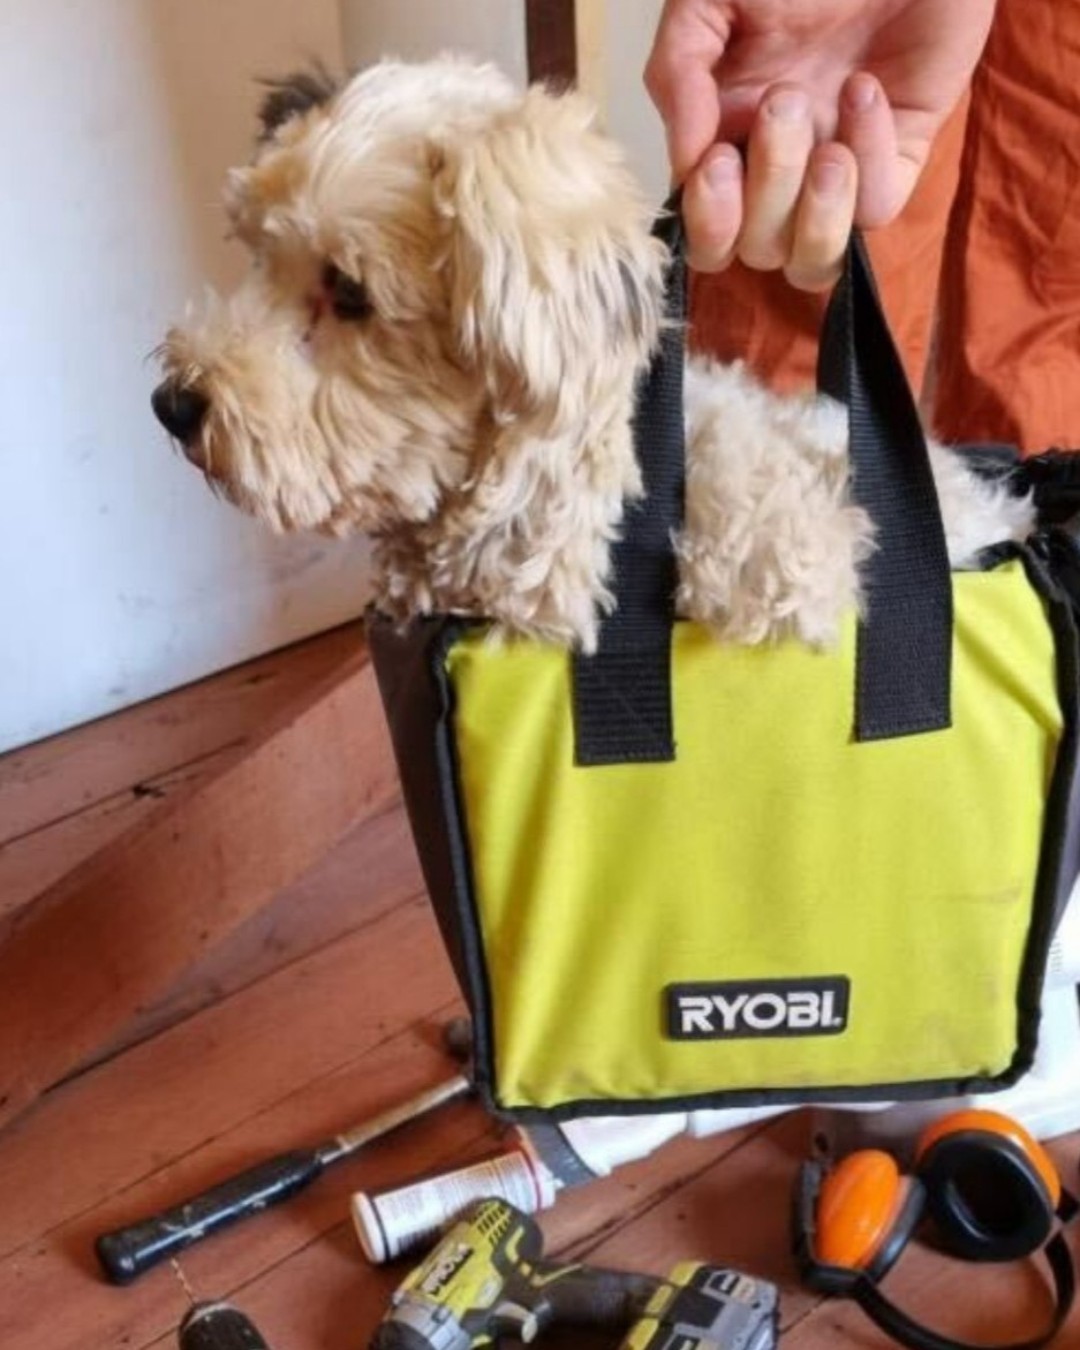 Are you as big a #RYOBIfan as Mei?

Make sure to tag #RYOBImade and @ryobiau in your RYOBI pictures for a chance to be featured 🙌

📸: @reno.resto

#RYOBIau #batterypowered #RYOBIpowertools #Dog #DIY #project